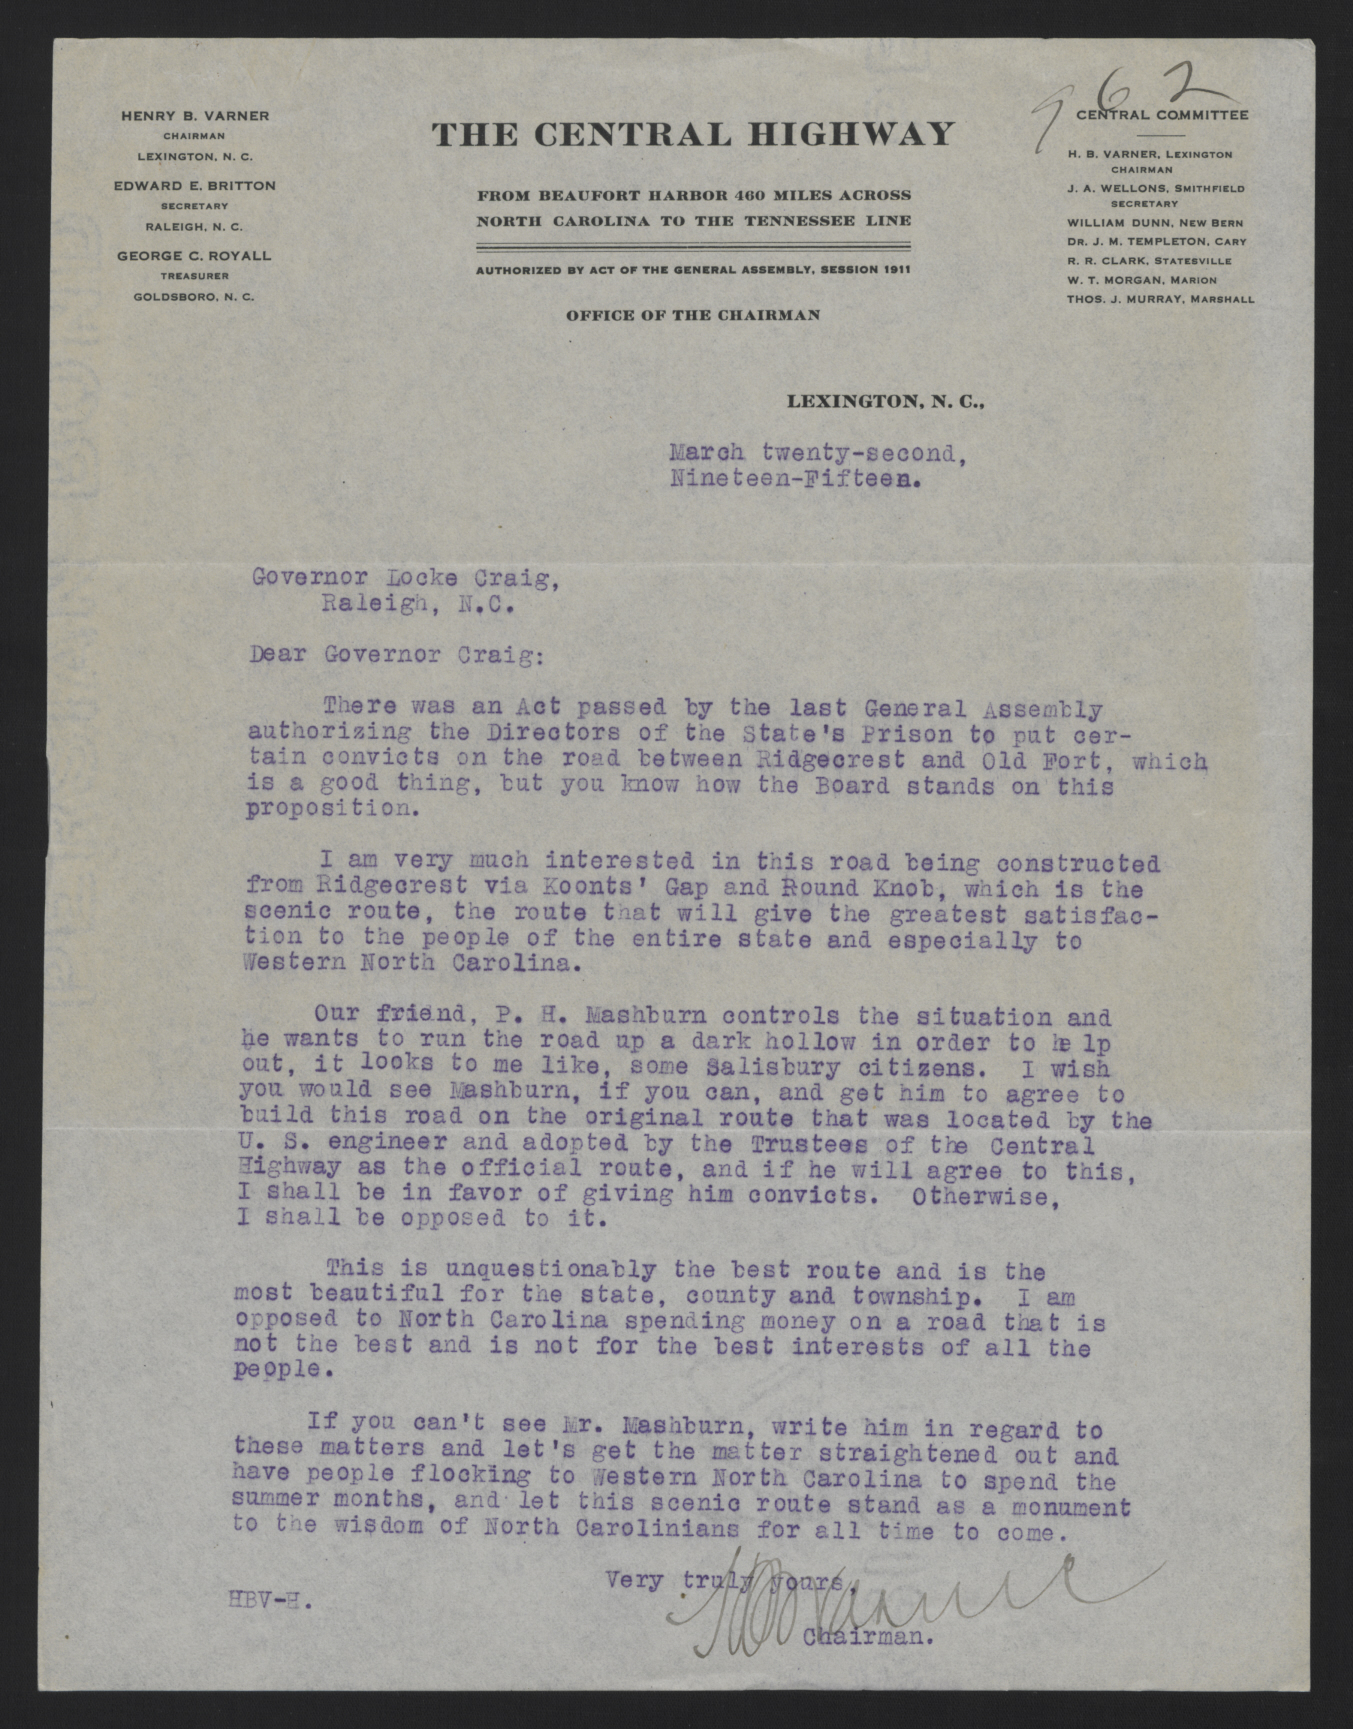 Letter from Varner to Craig, March 22, 1915